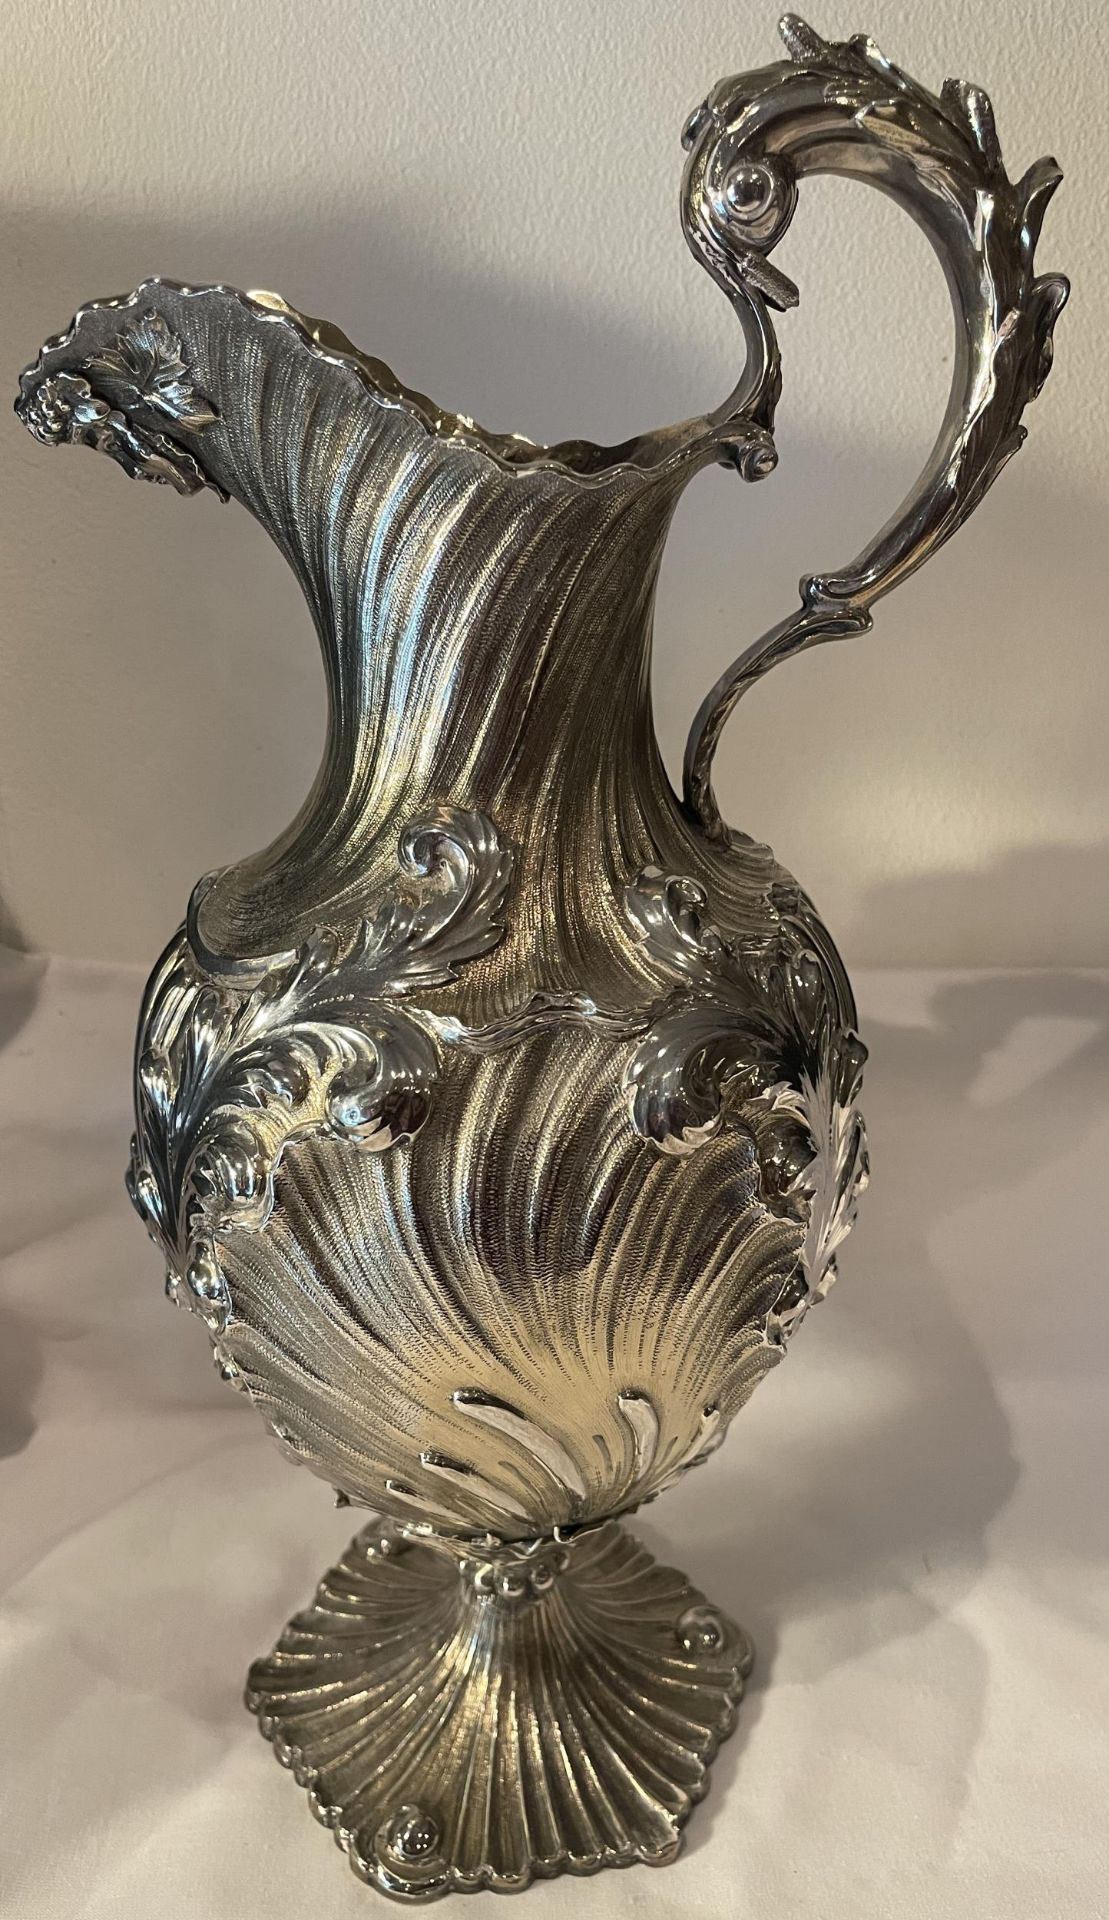 AN ORNATE 1830 HALLMARKED LONDON SILVER CLARET JUG, MAKER CHARLES FOX II GROSS WEIGHT 878 GRAMS - Image 2 of 18